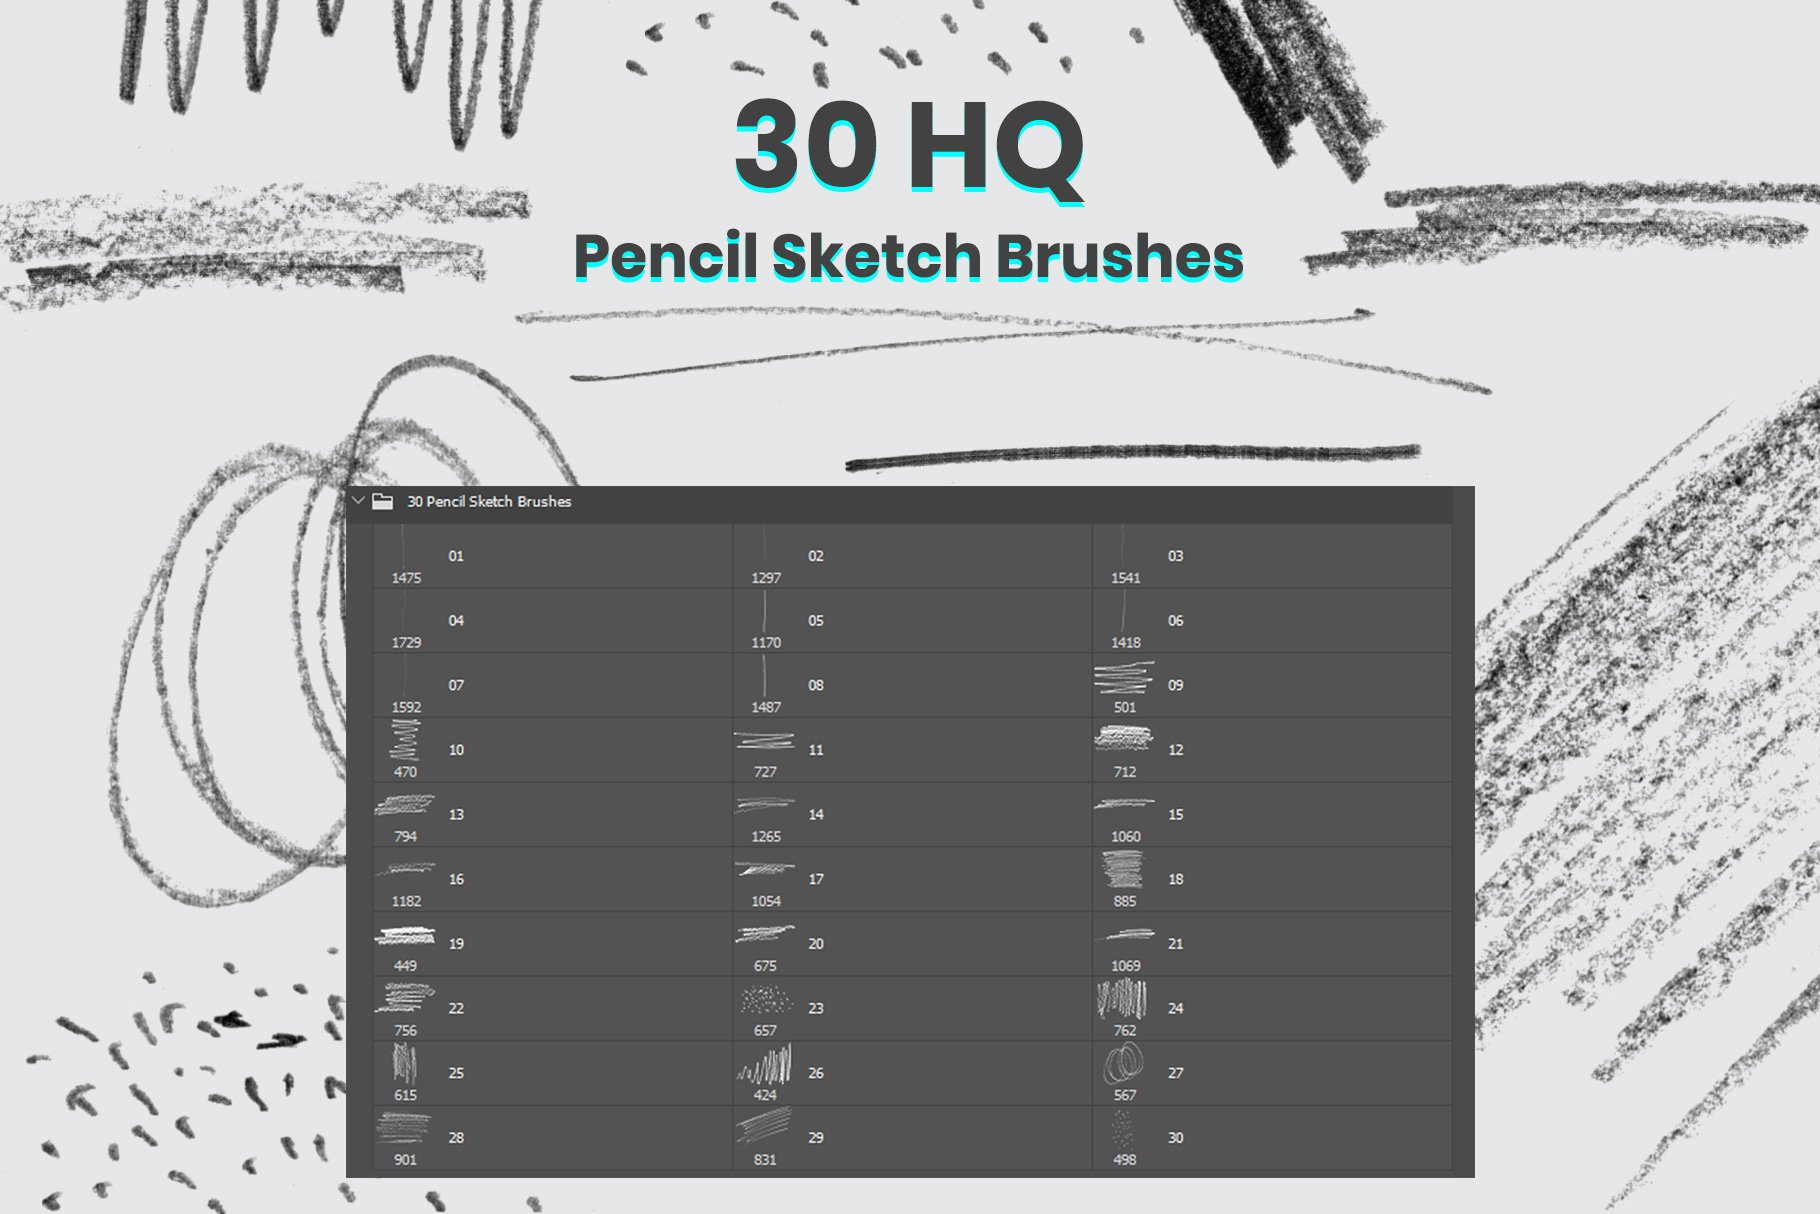 Pencil Sketch Brushes For Photoshopcover image.